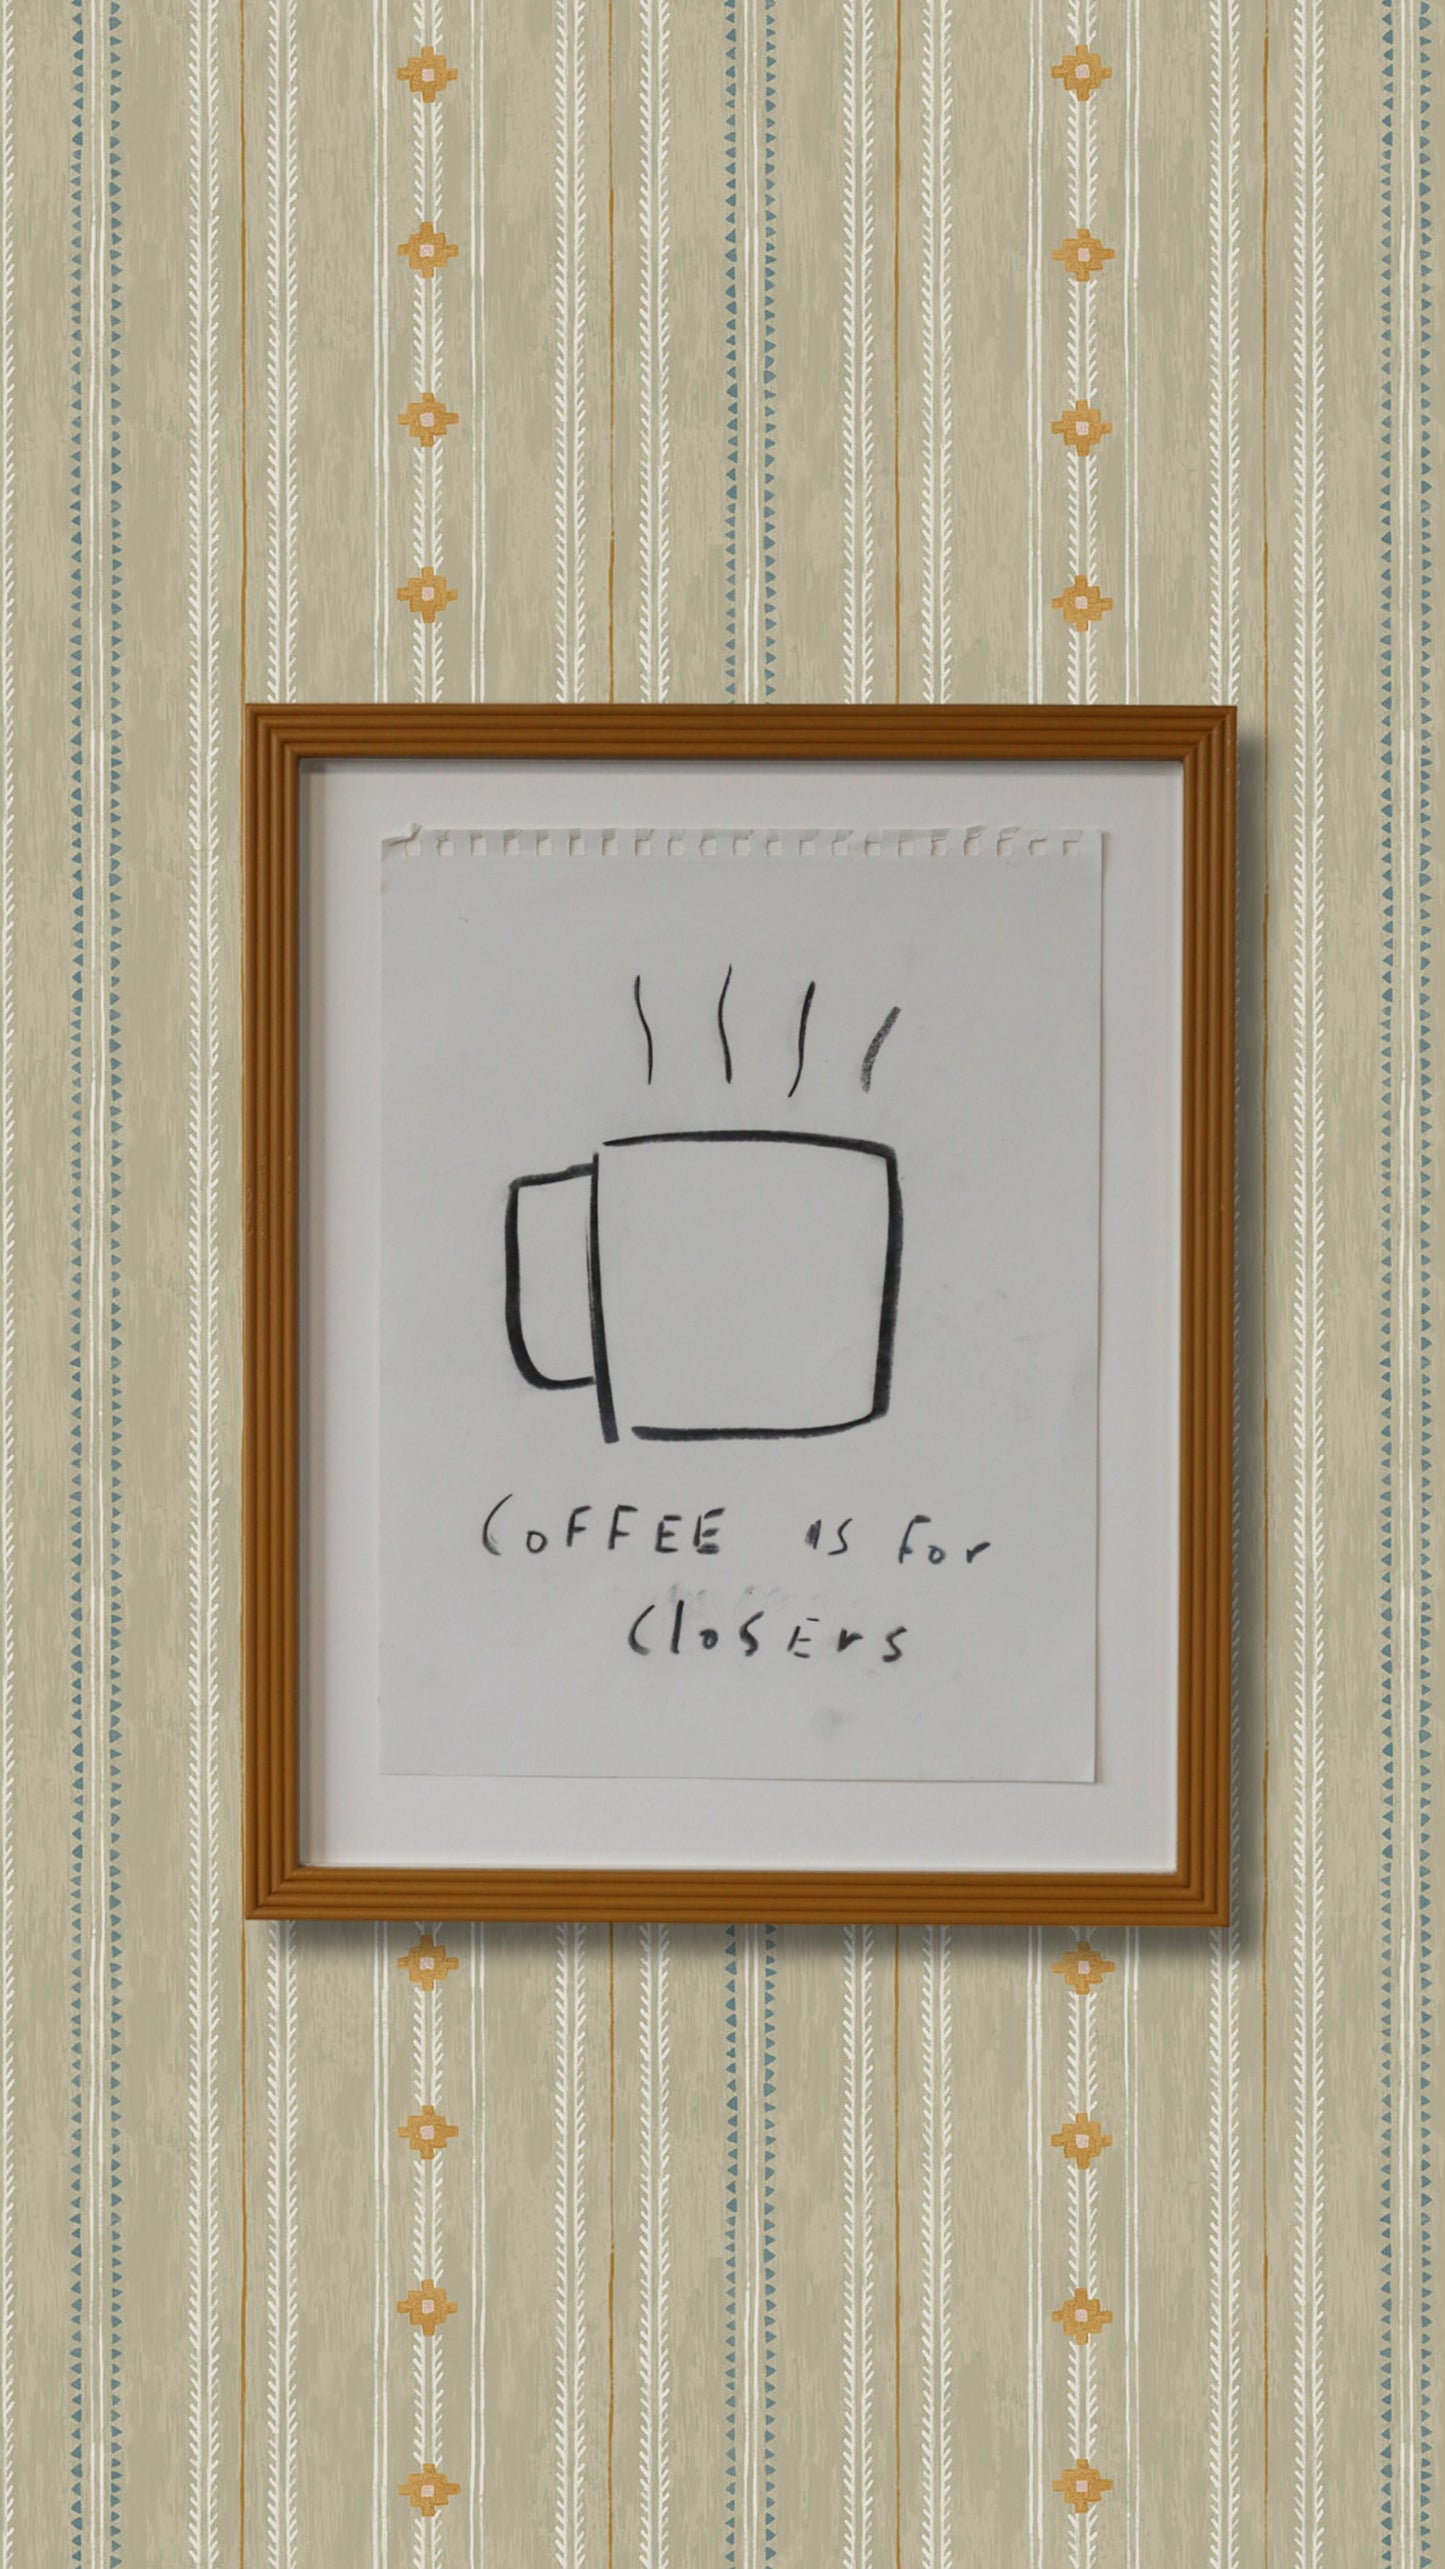 "Coffee is for Closers" Framed Charcoal Sketch